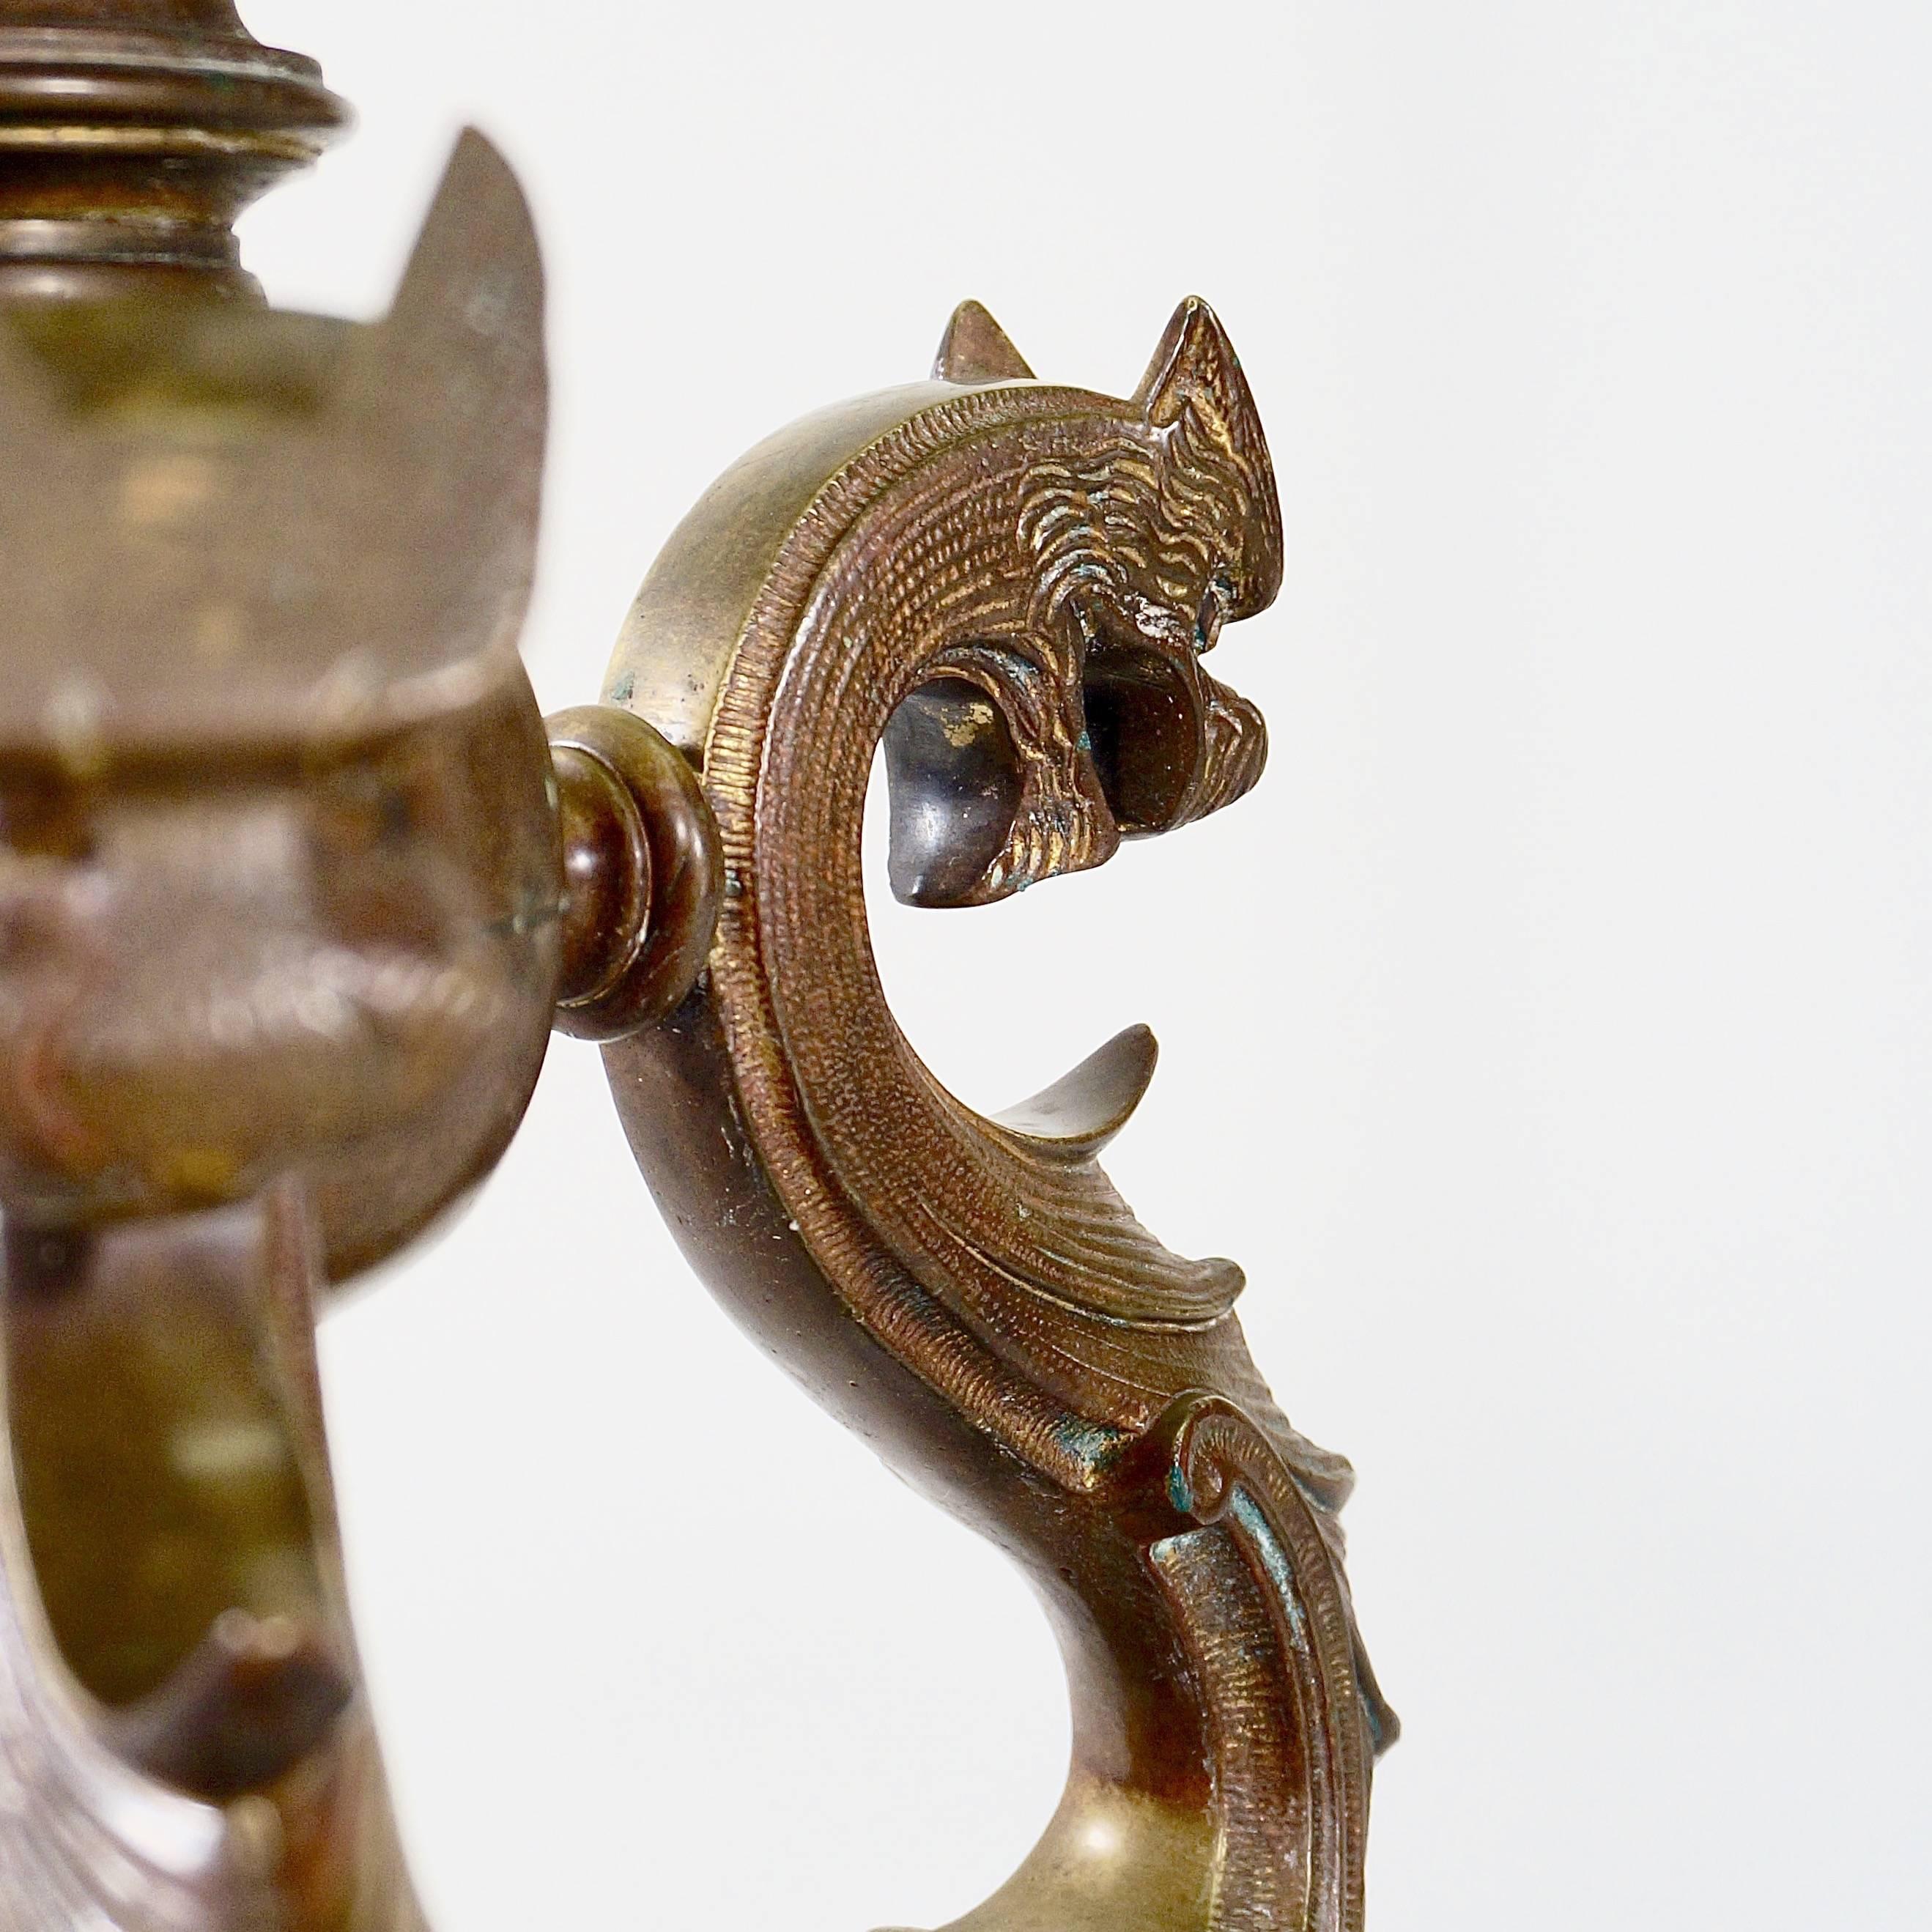 The tripod base with lion paw feet and dragon bodies with traces of original gilding joined by a central boss supporting a fluted column with an extending gilt brass stem.

Possibly by Ferdinand Barbidienne (1810-1892).

Originally a torchere